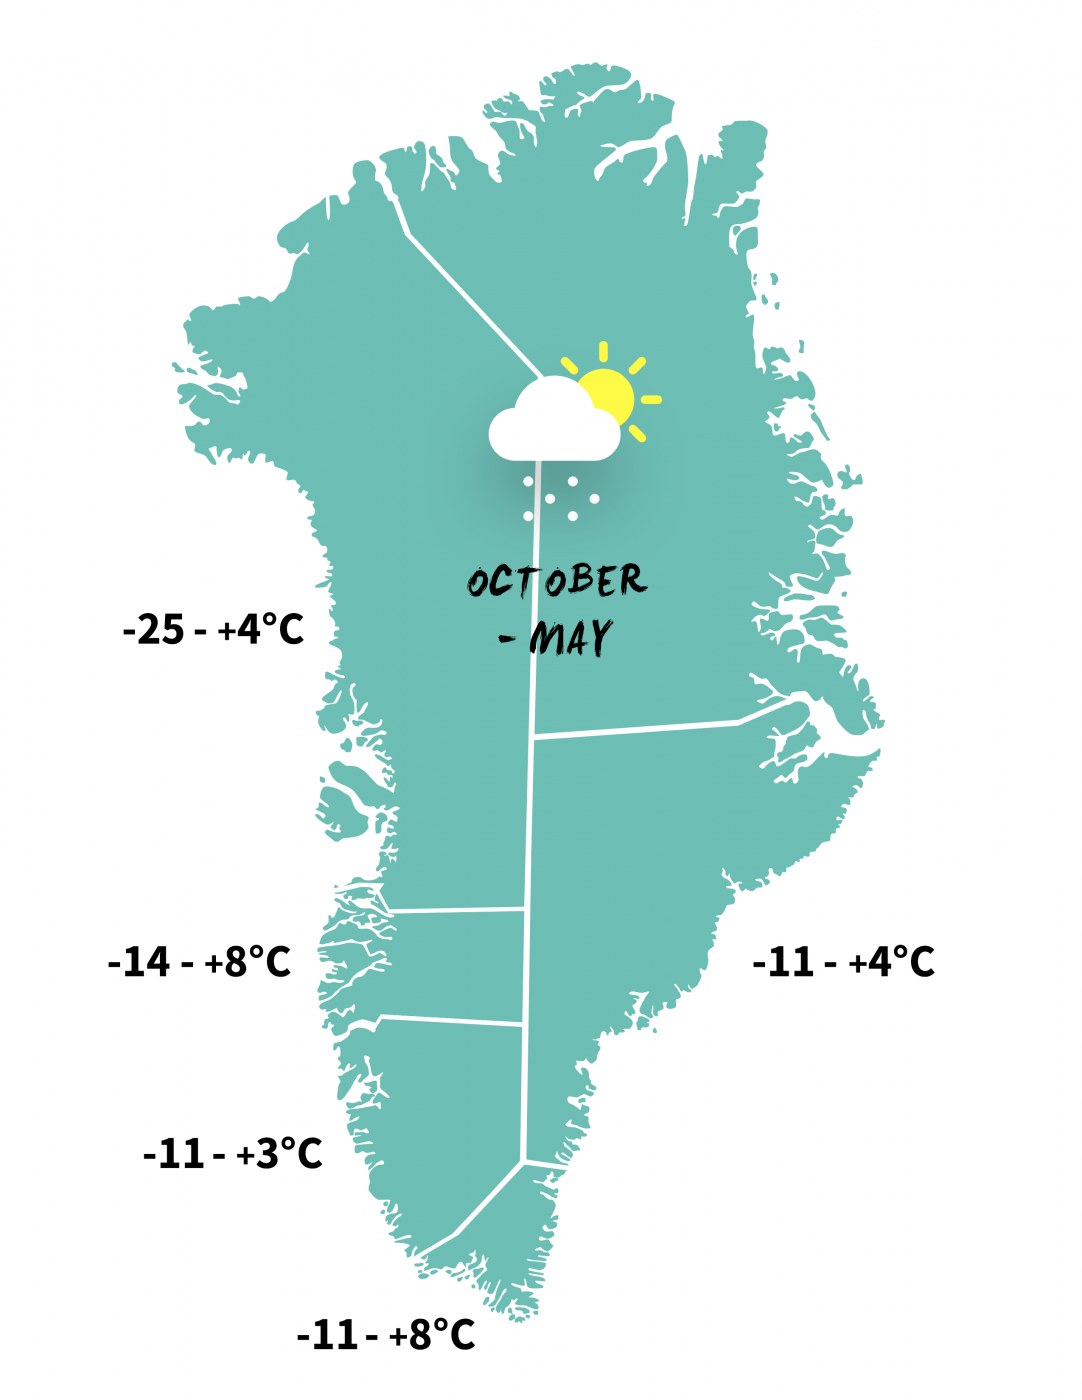 Winter in - get ready arctic [Visit Greenland!]